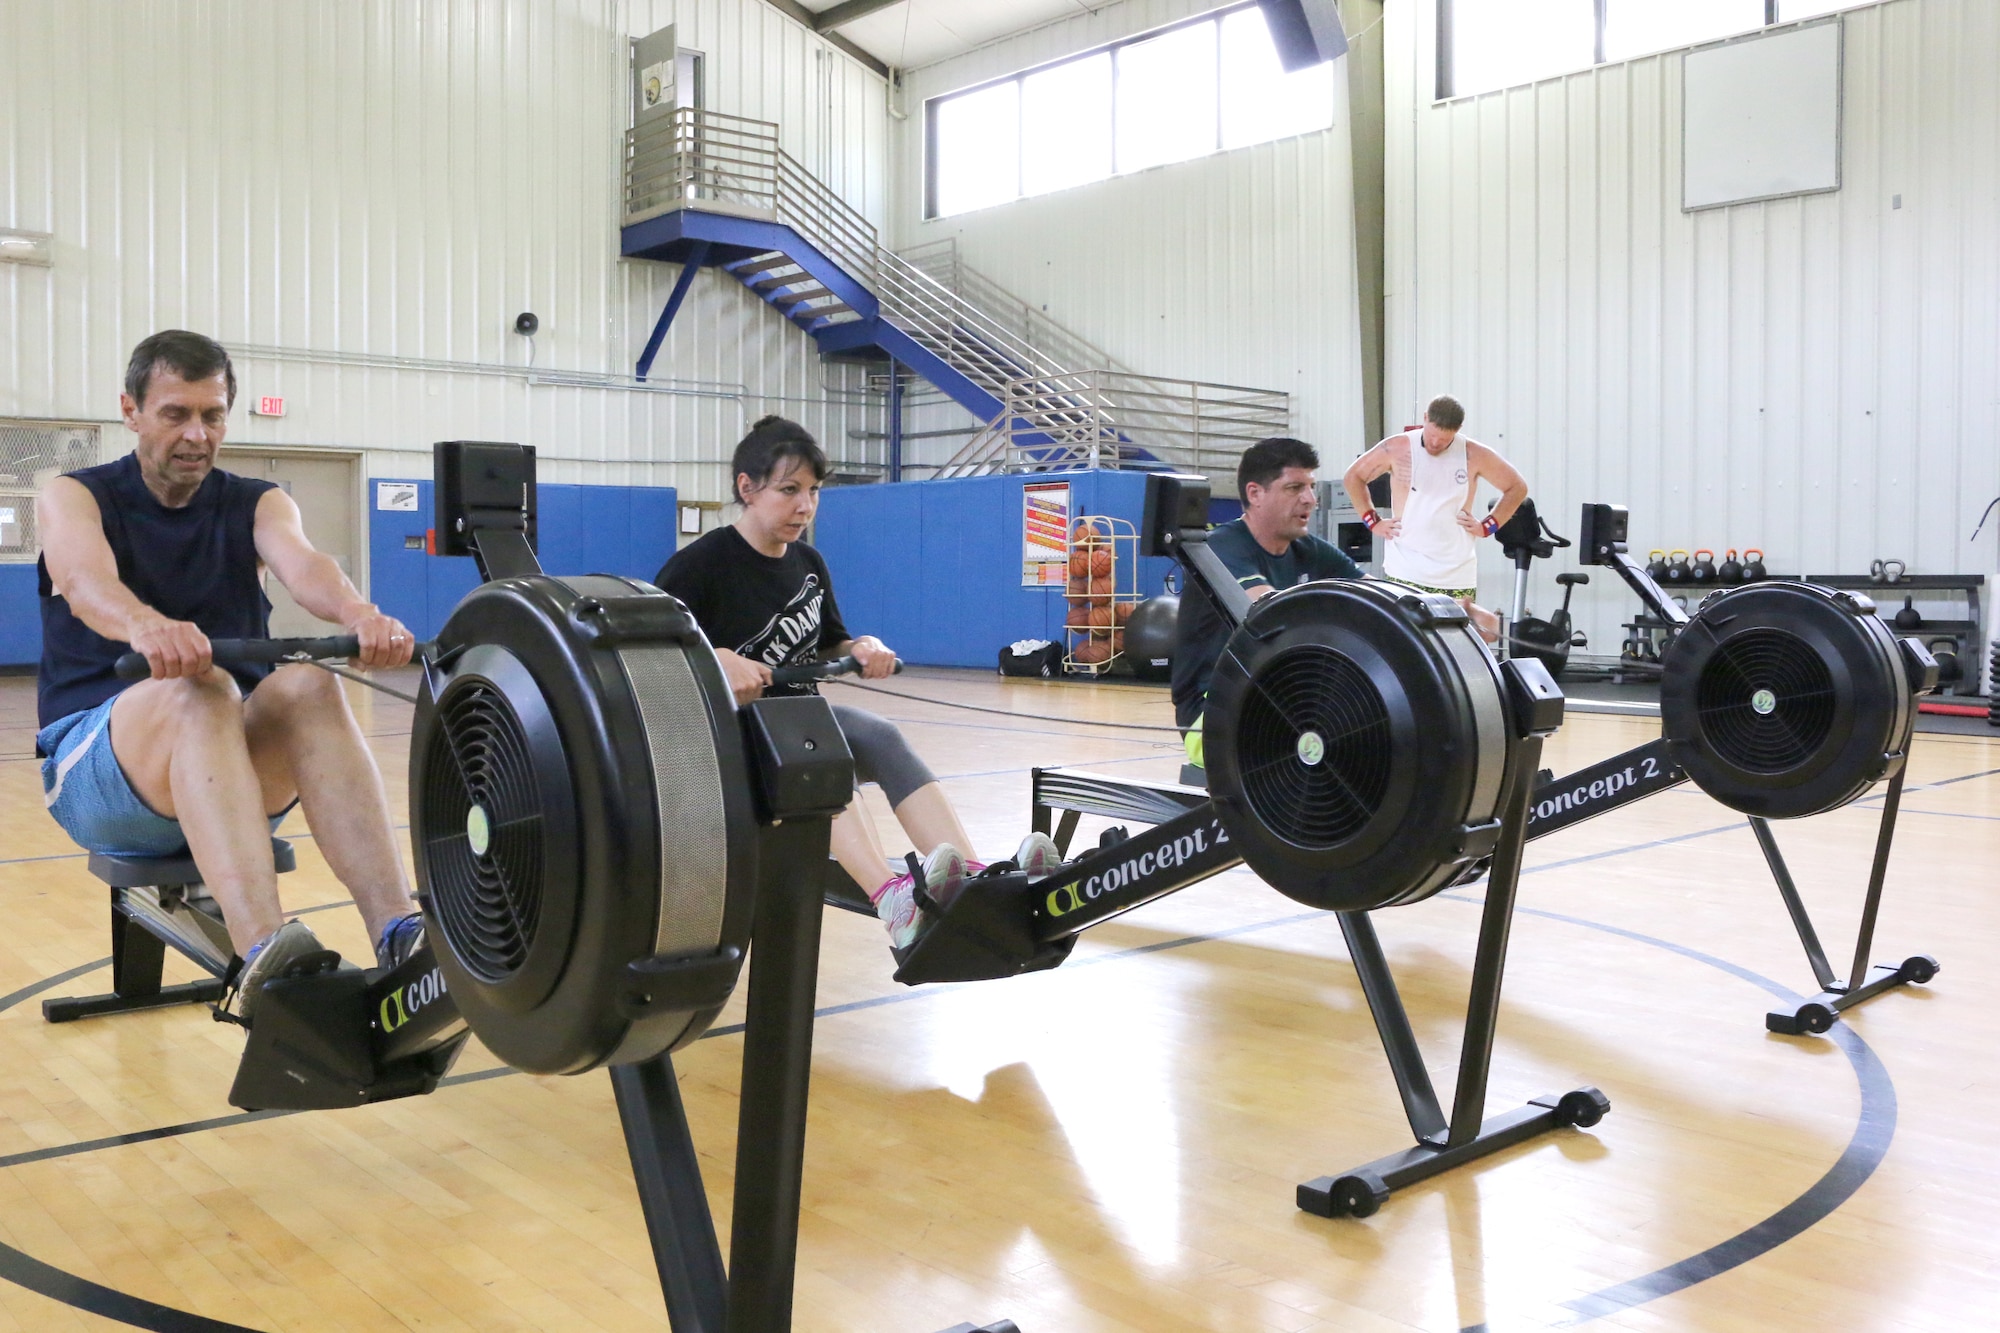 Participants of the May 21 interval training class at the Arnold Air Force Base Fitness Center utilize rowing machines as part of their workout. The class is among several classes and activities offered by the Fitness Center. (U.S. Air Force photo/Bradley Hicks)